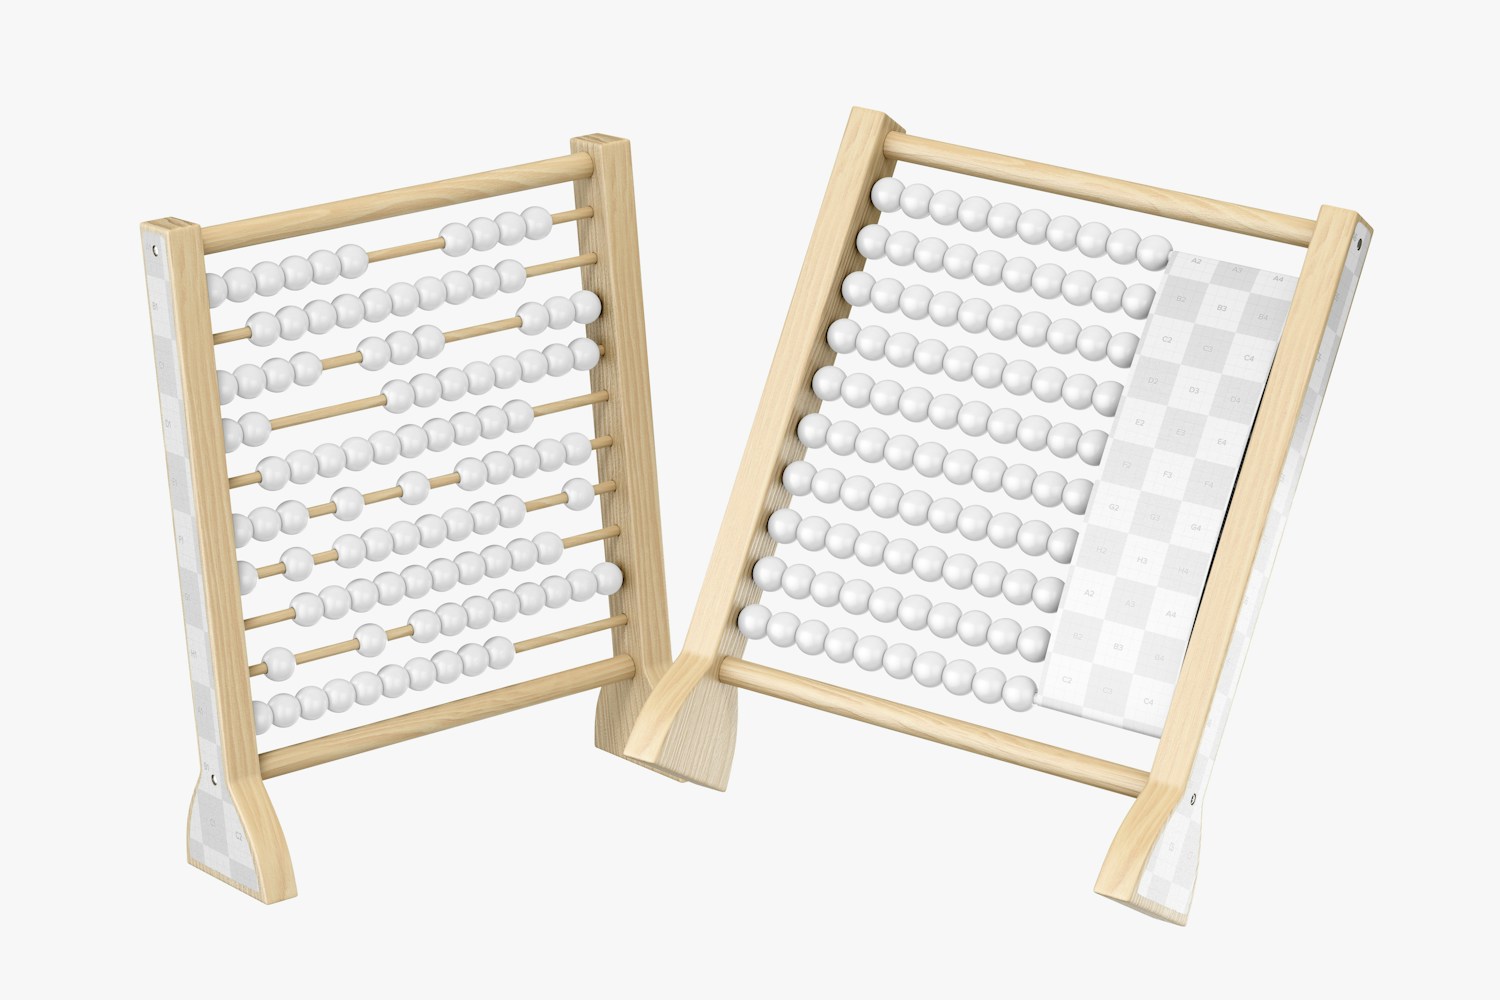 Wooden Abacus Mockup, Floating